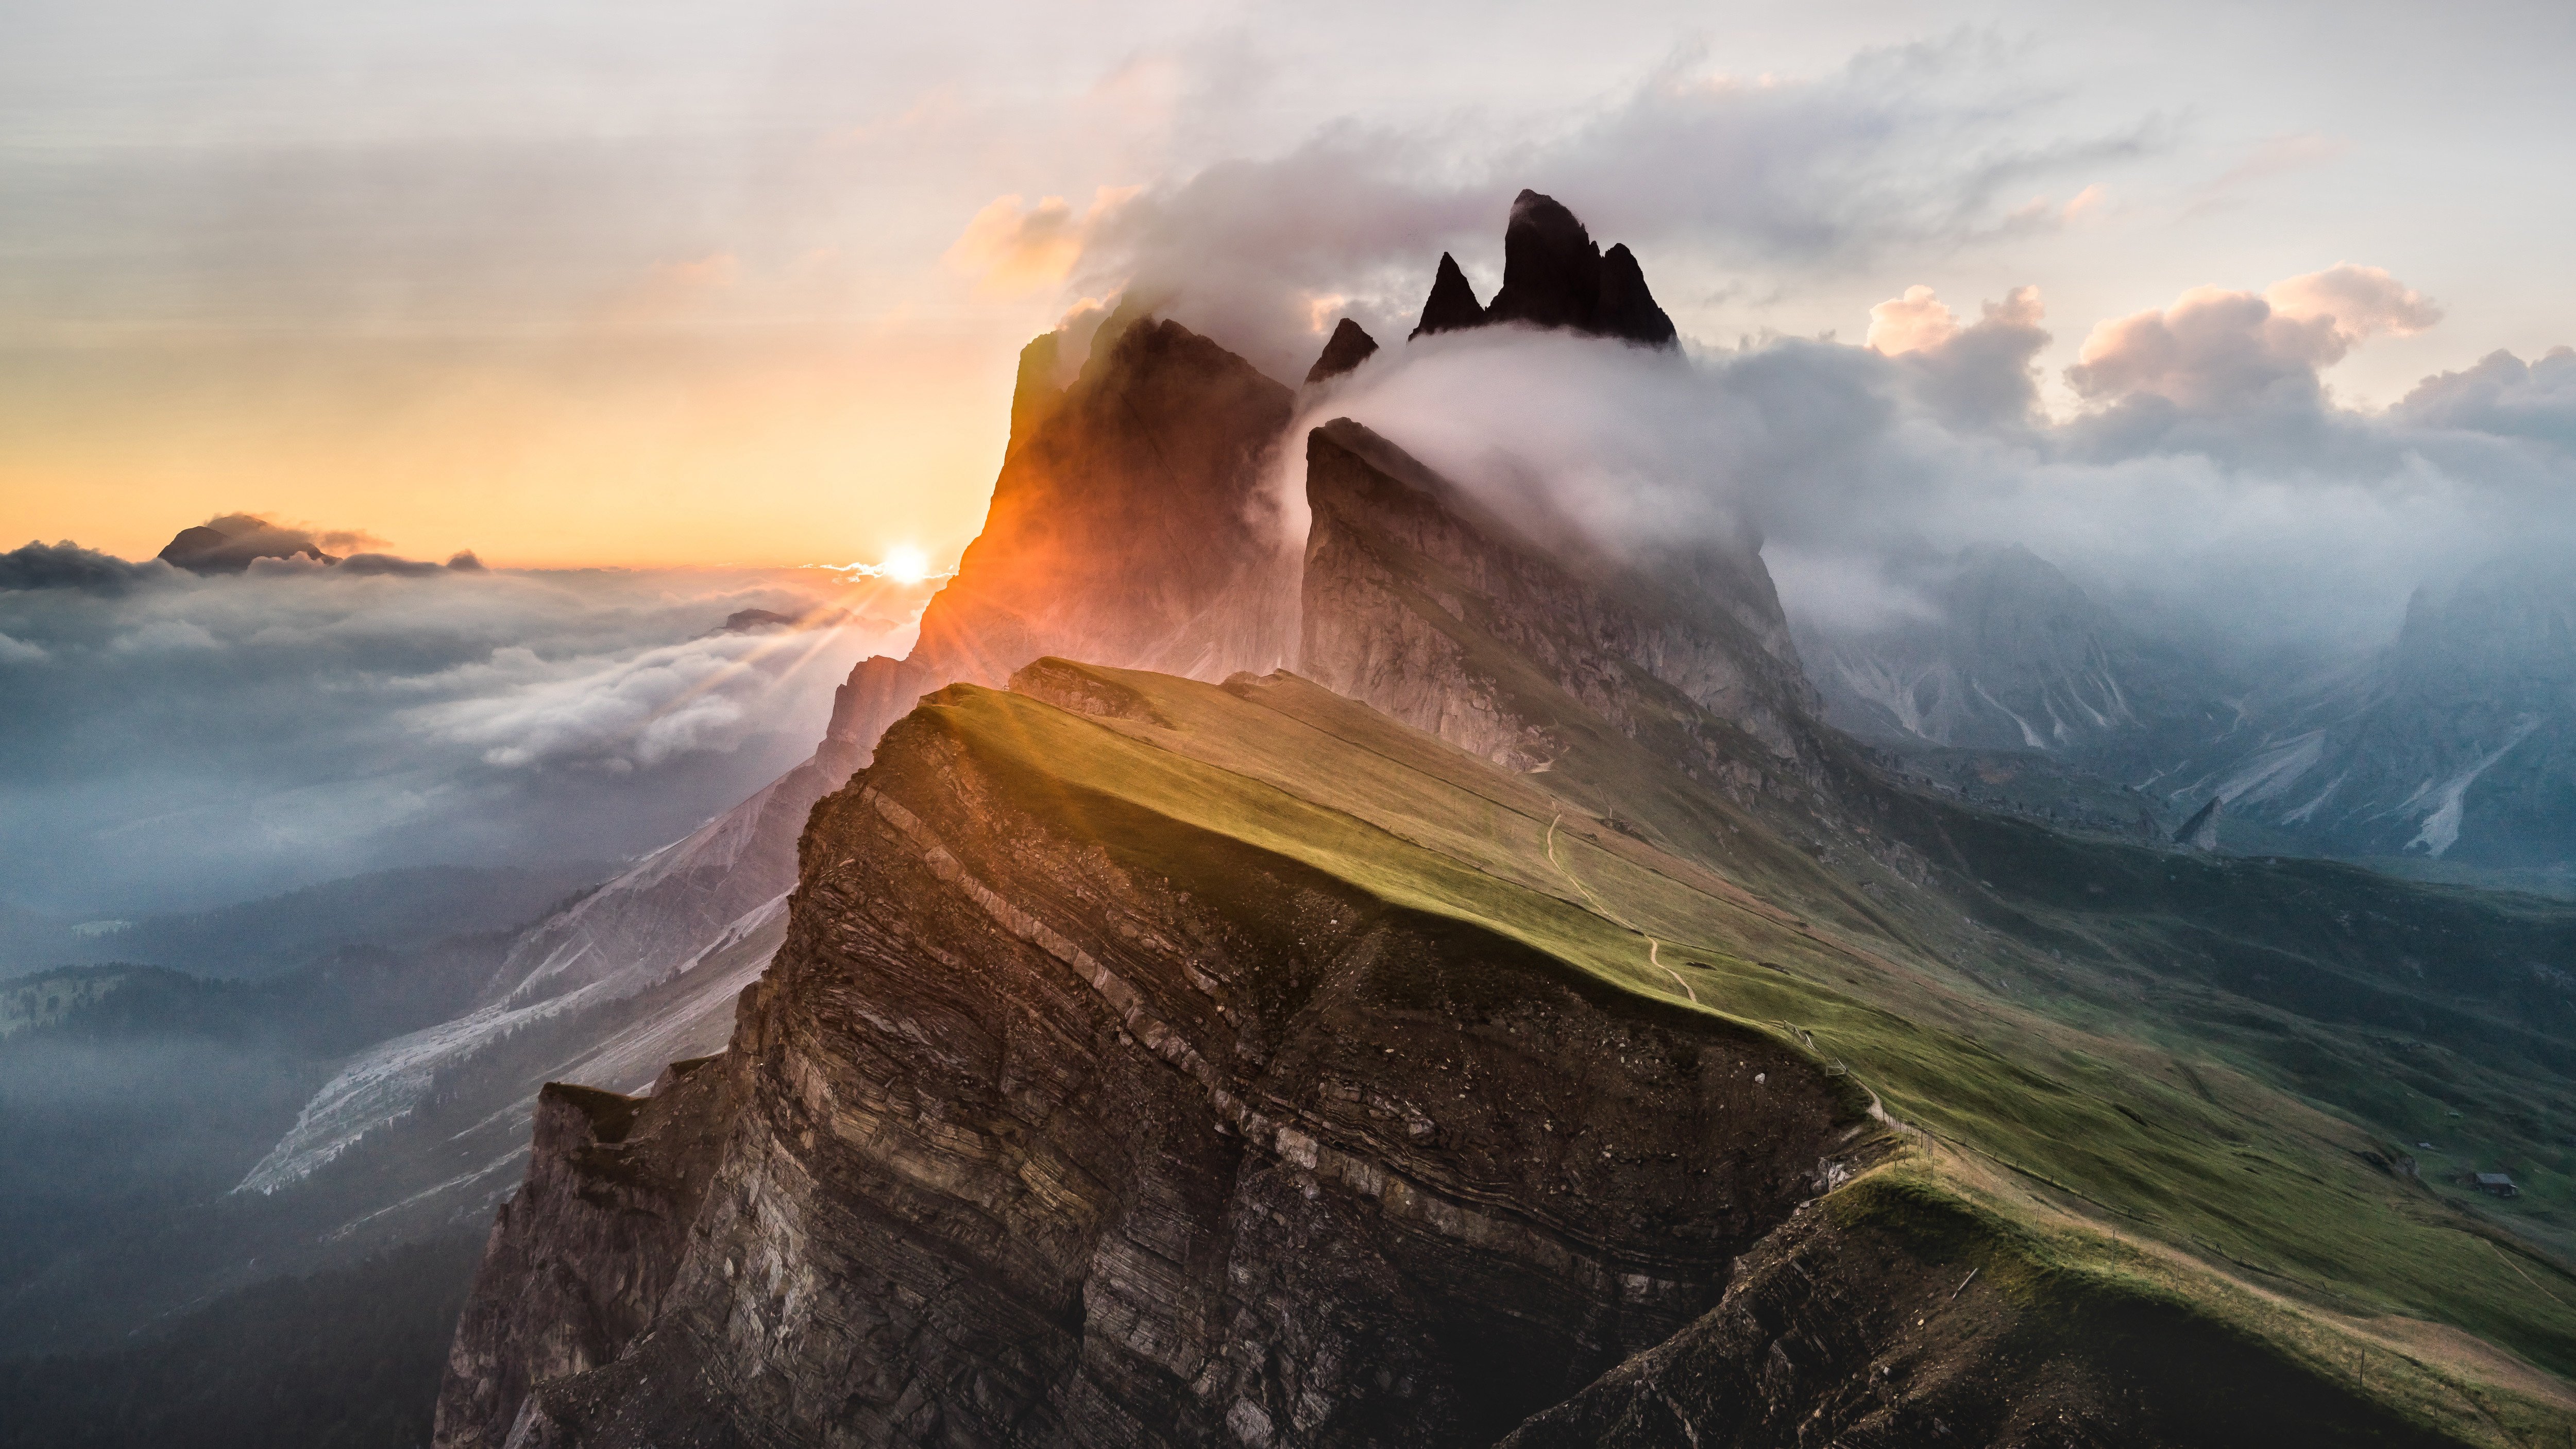 Dolomites Mountains Wallpapers